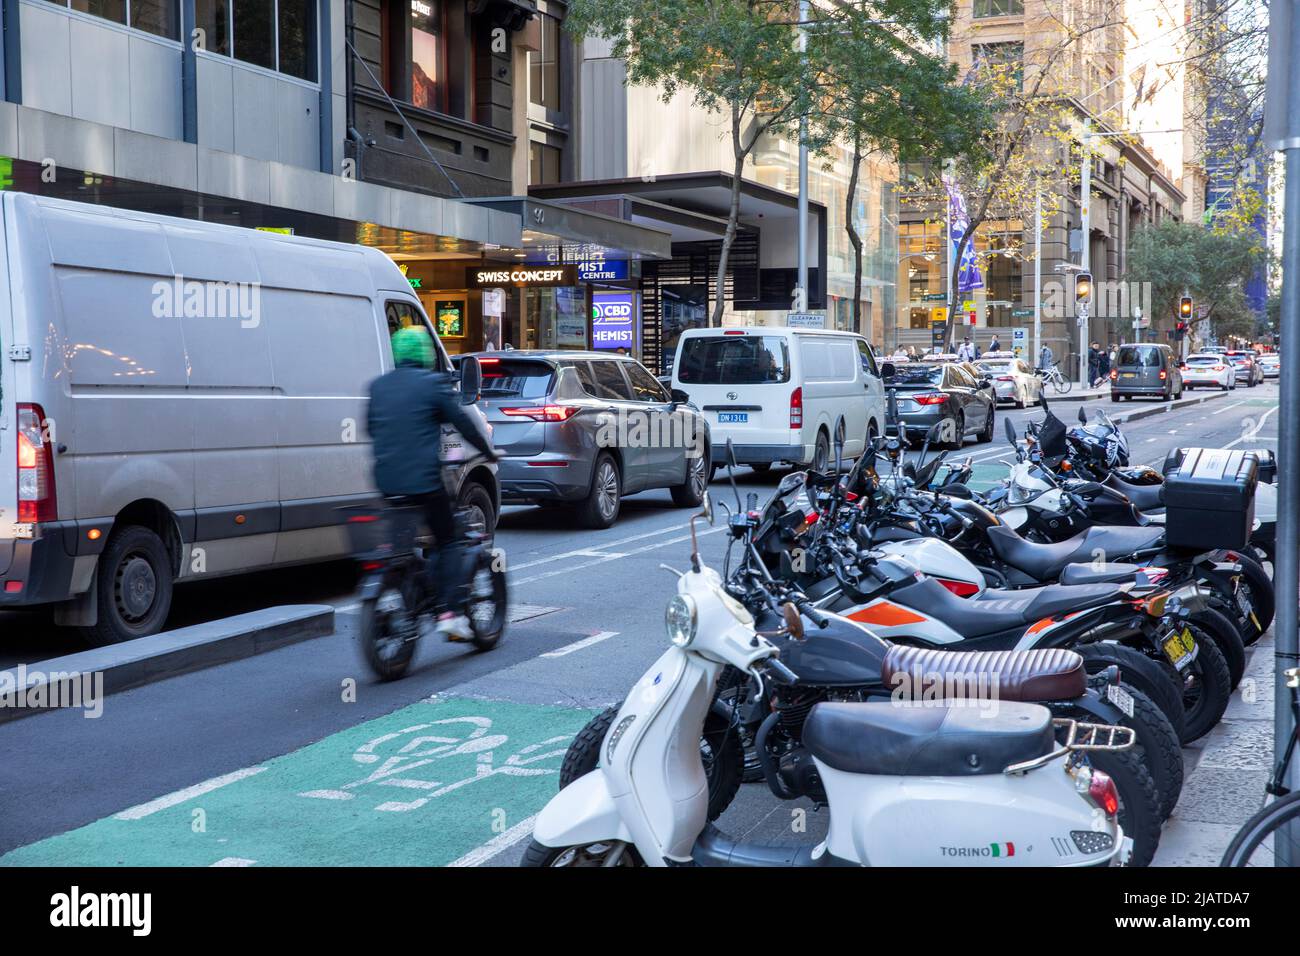 Sydney city centre, traffic queue and congestion on Pitt street, motorcycle parking bay beside bicycle lane,NSW,Australia Stock Photo